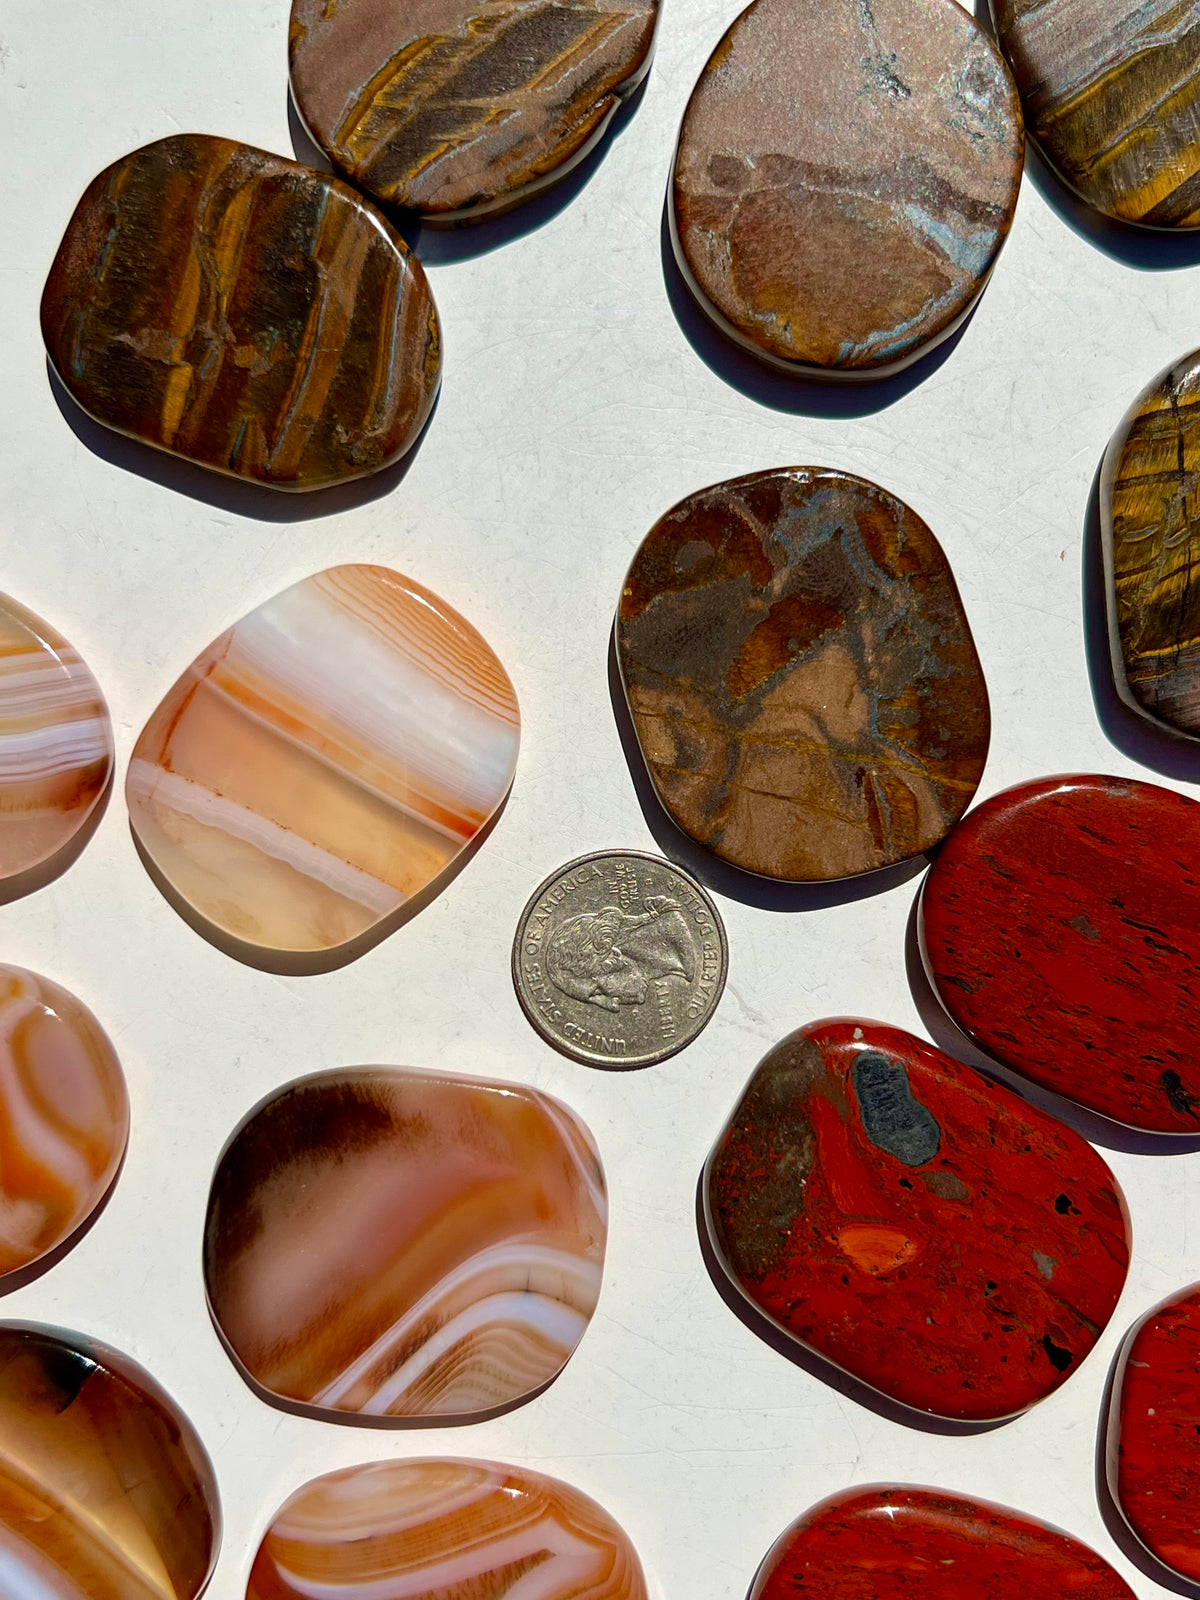 The Confidence Trio ( Red Jasper, Banded Carnelian, Tiger Iron)